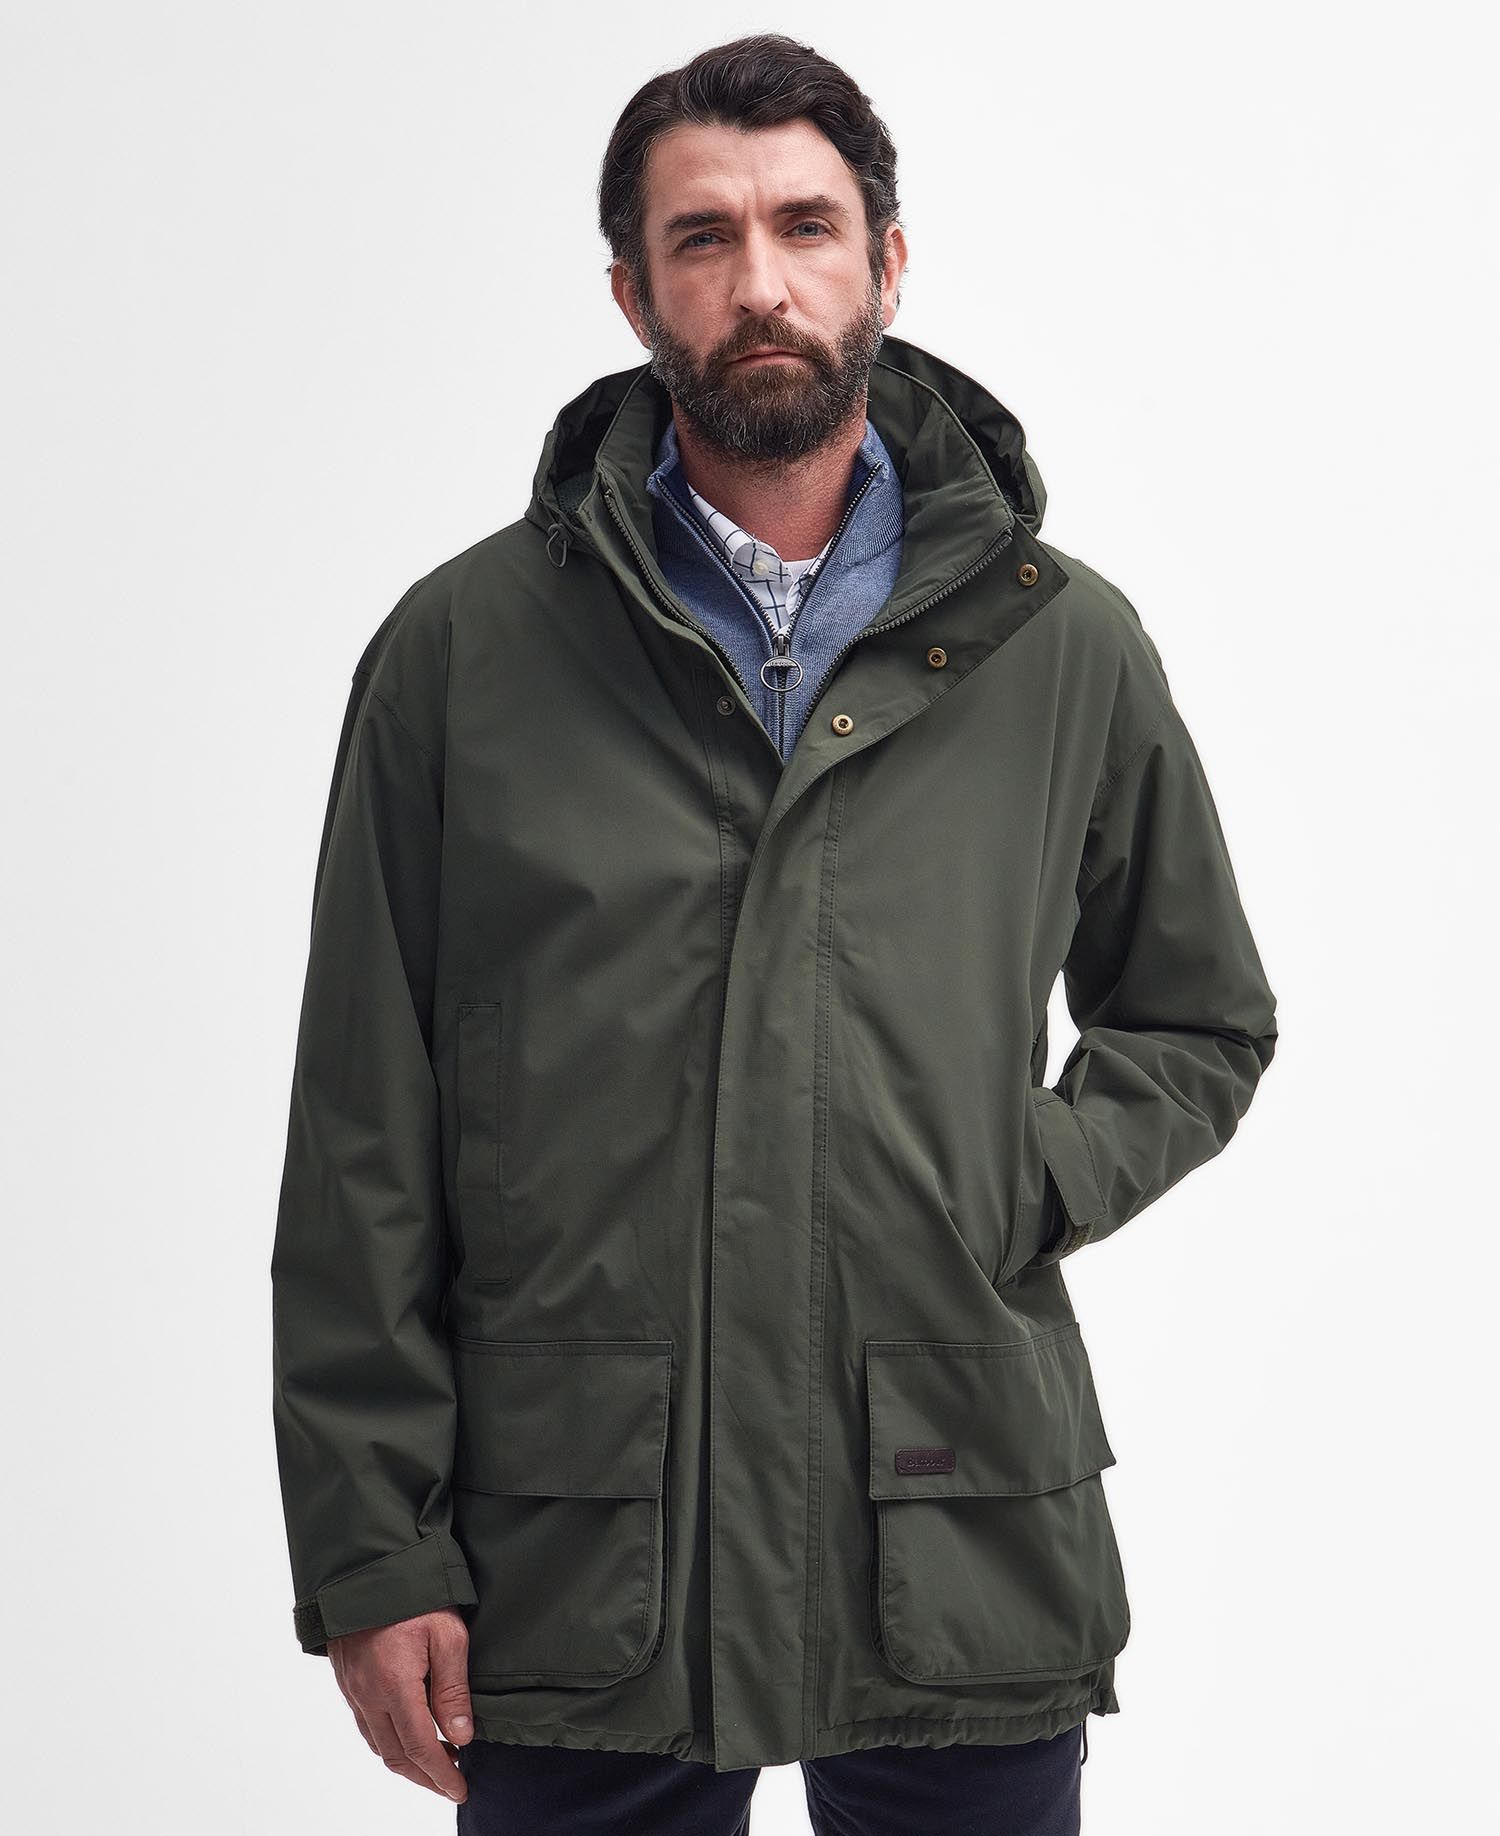 Shop the Barbour Swinton Jacket here at Barbour. | Barbour